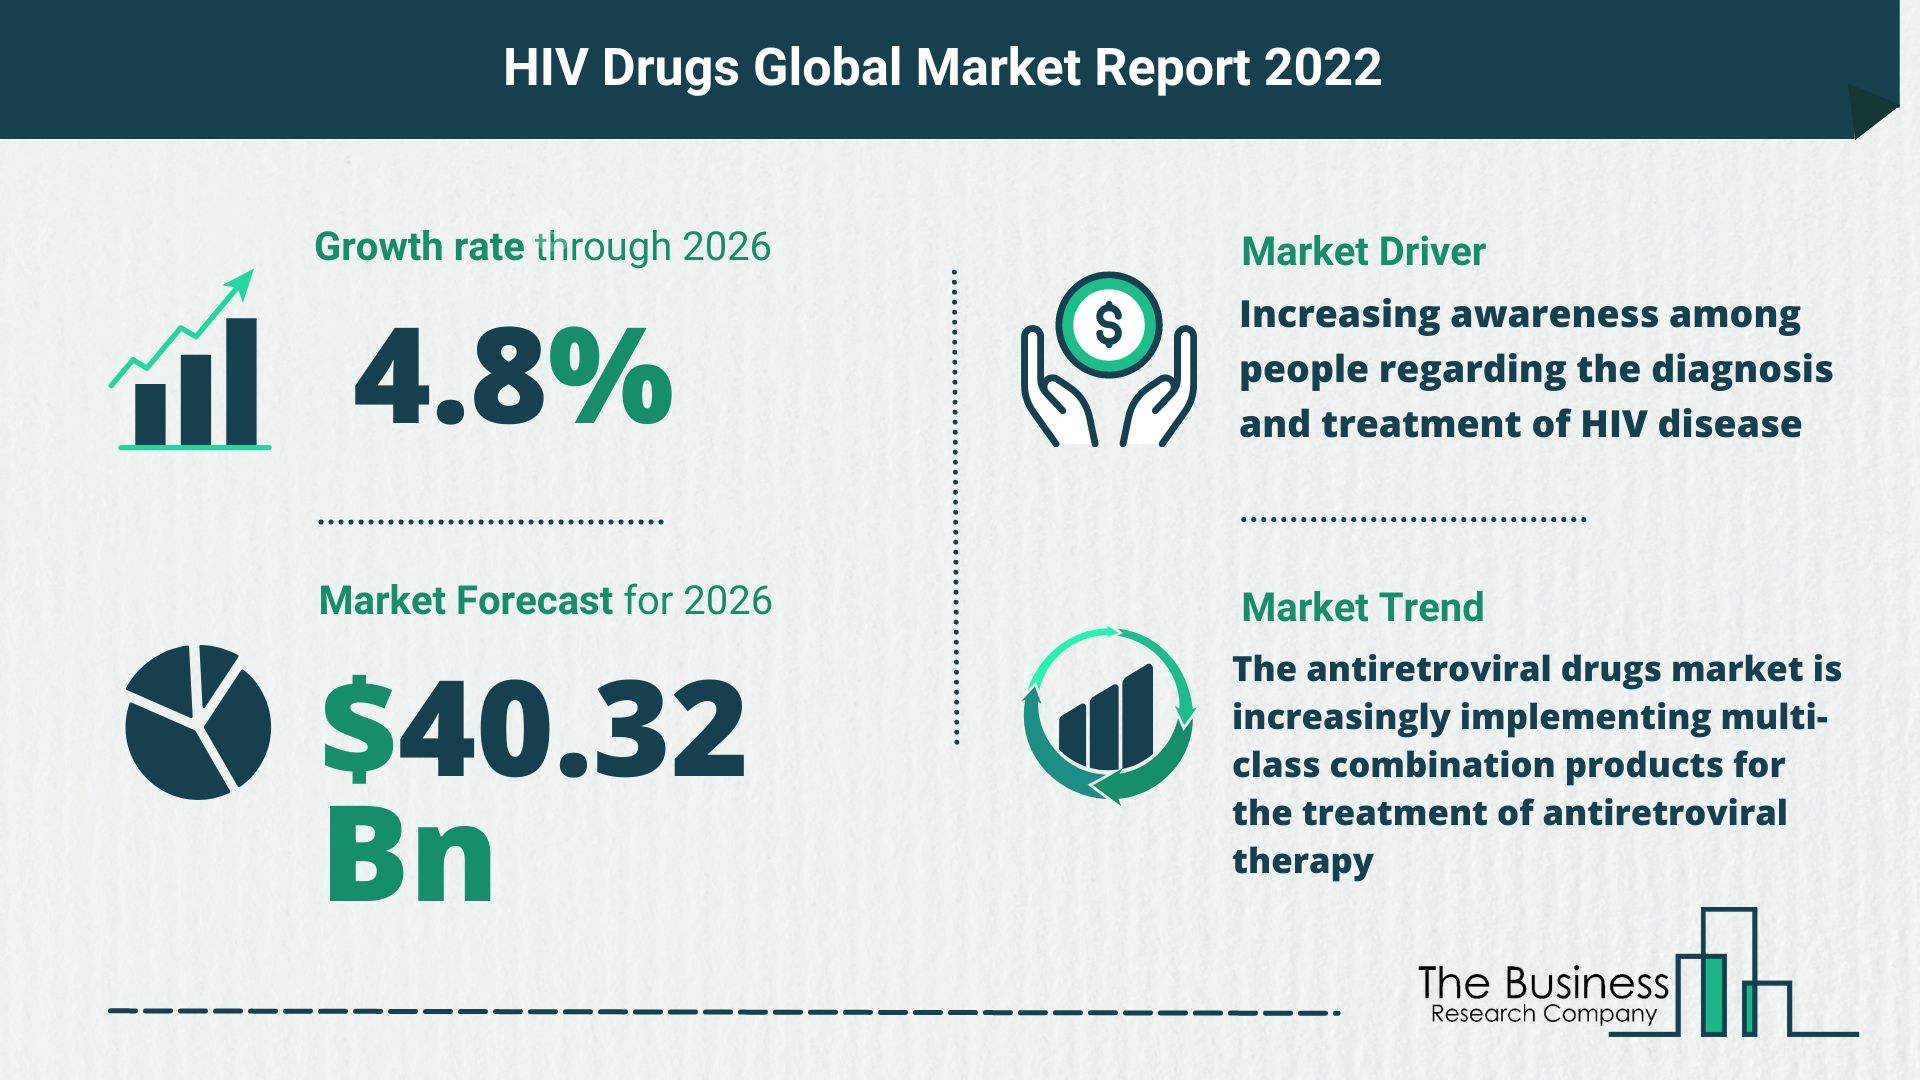 How Will The HIV Drugs Market Grow In 2022?